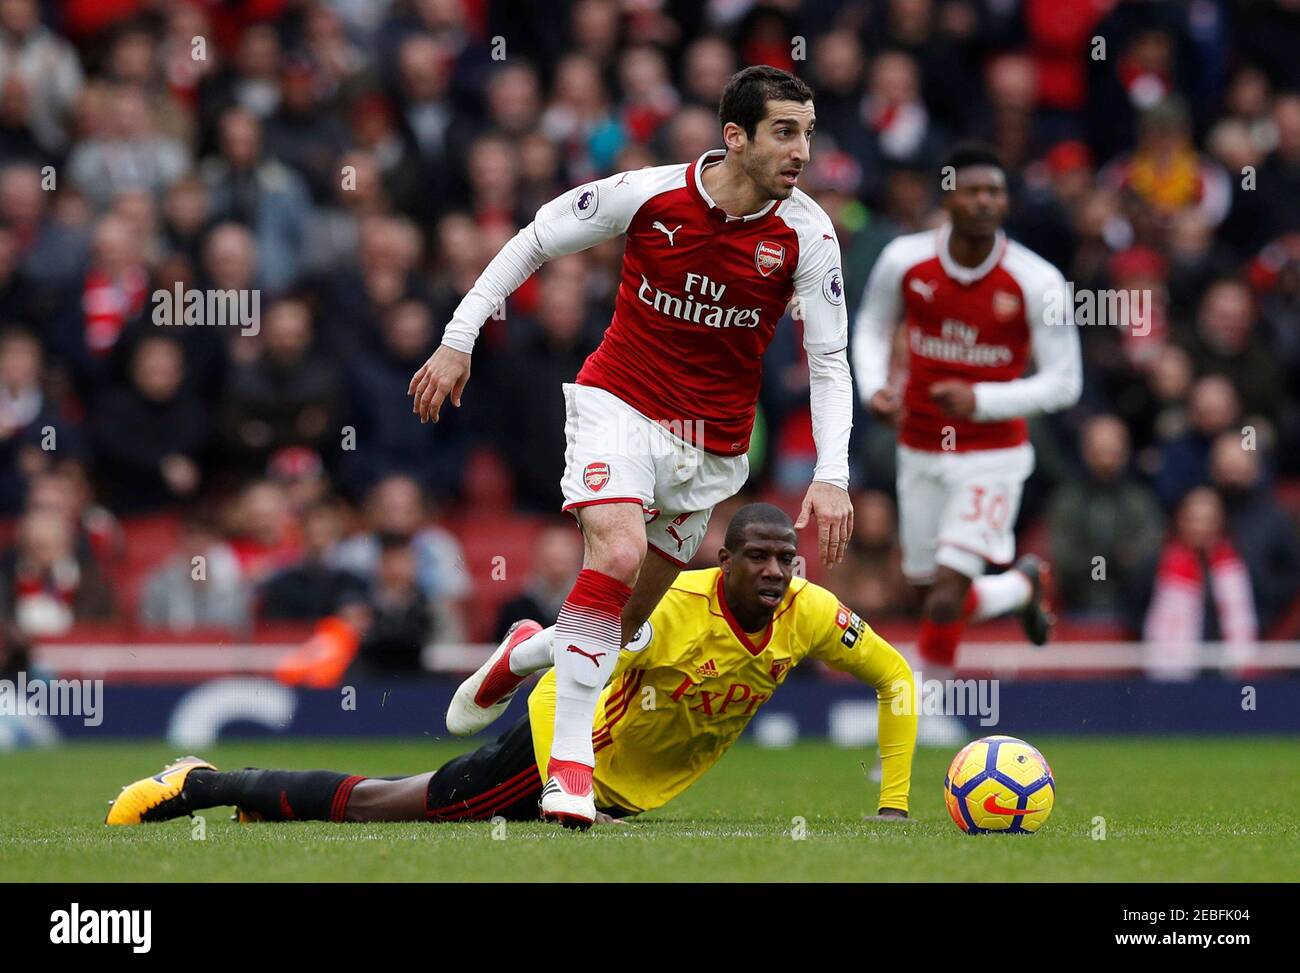 Soccer Football - Premier League - Arsenal vs Watford - Emirates Stadium, London, Britain - March 11, 2018   Arsenal's Henrikh Mkhitaryan in action with Watford's Abdoulaye Doucoure                 REUTERS/Eddie Keogh    EDITORIAL USE ONLY. No use with unauthorized audio, video, data, fixture lists, club/league logos or 'live' services. Online in-match use limited to 75 images, no video emulation. No use in betting, games or single club/league/player publications.  Please contact your account representative for further details. Stock Photo